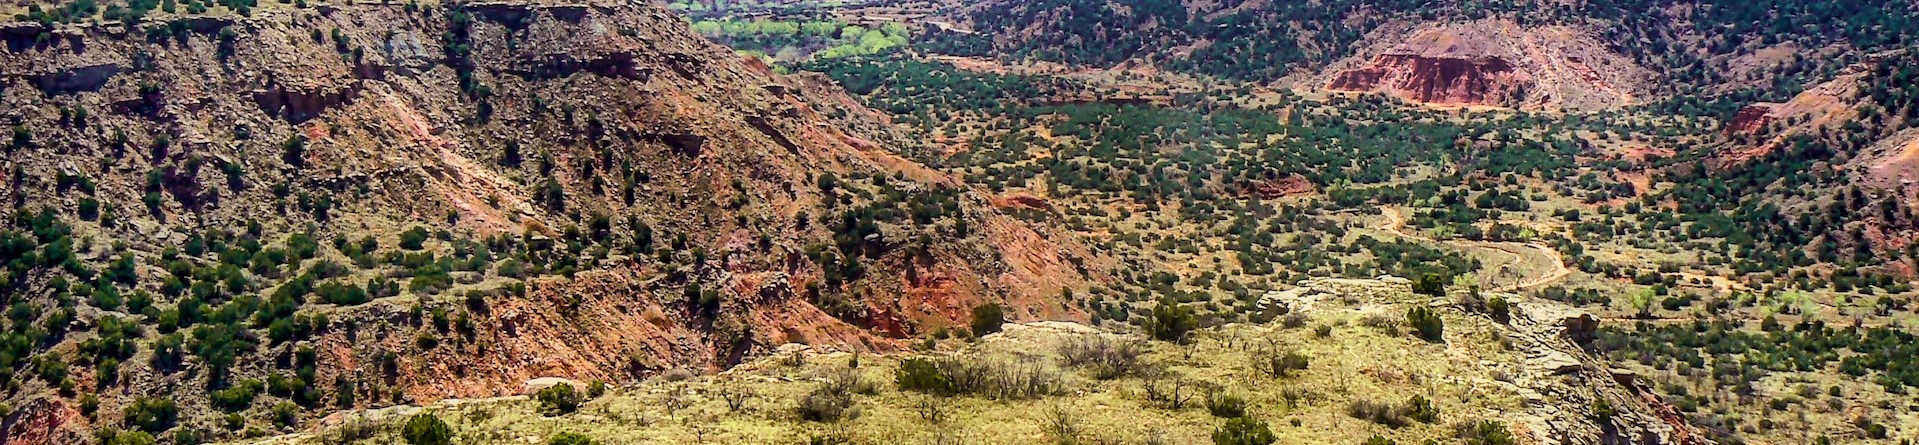 Springtime in Palo Duro Canyon (Apr., 2009) | Breast Cancer Car Donations